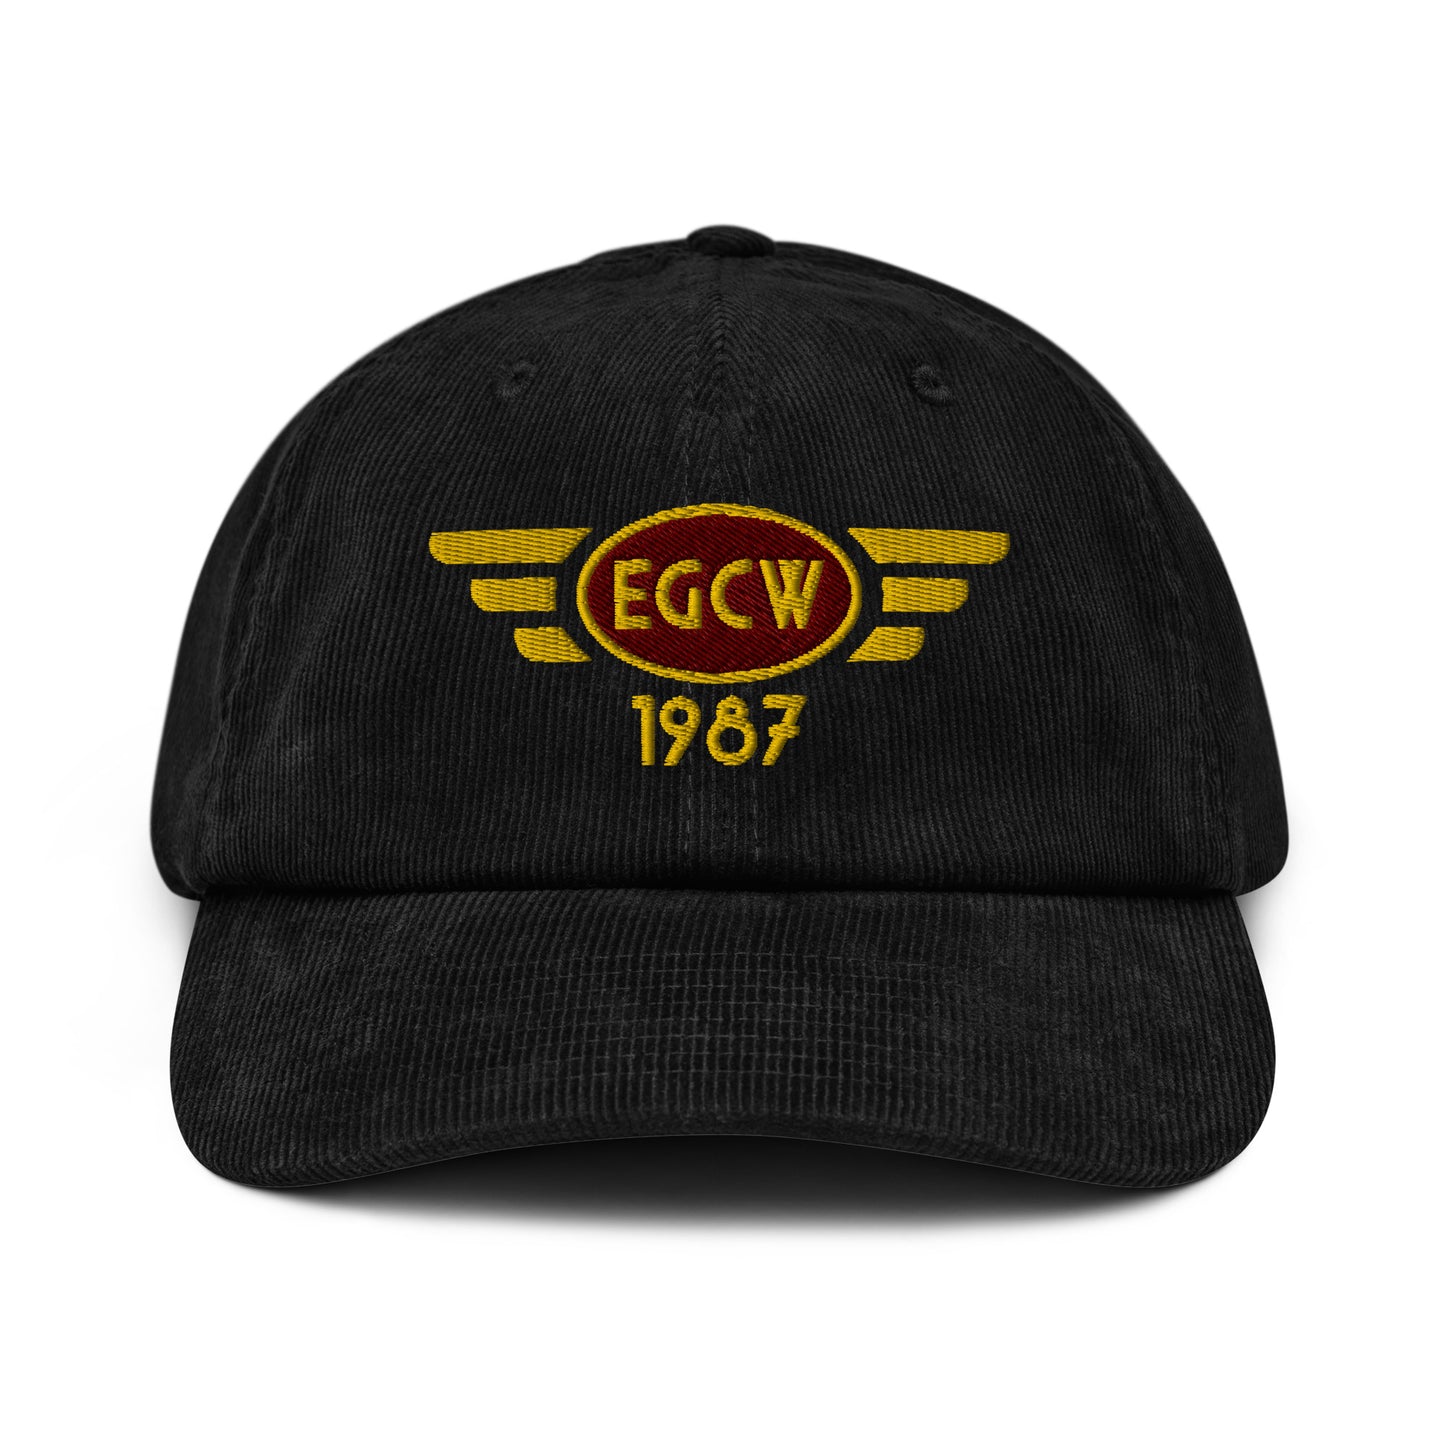 Black corduroy baseball cap with embroidered vintage style aviation logo for Welshpool Airport.